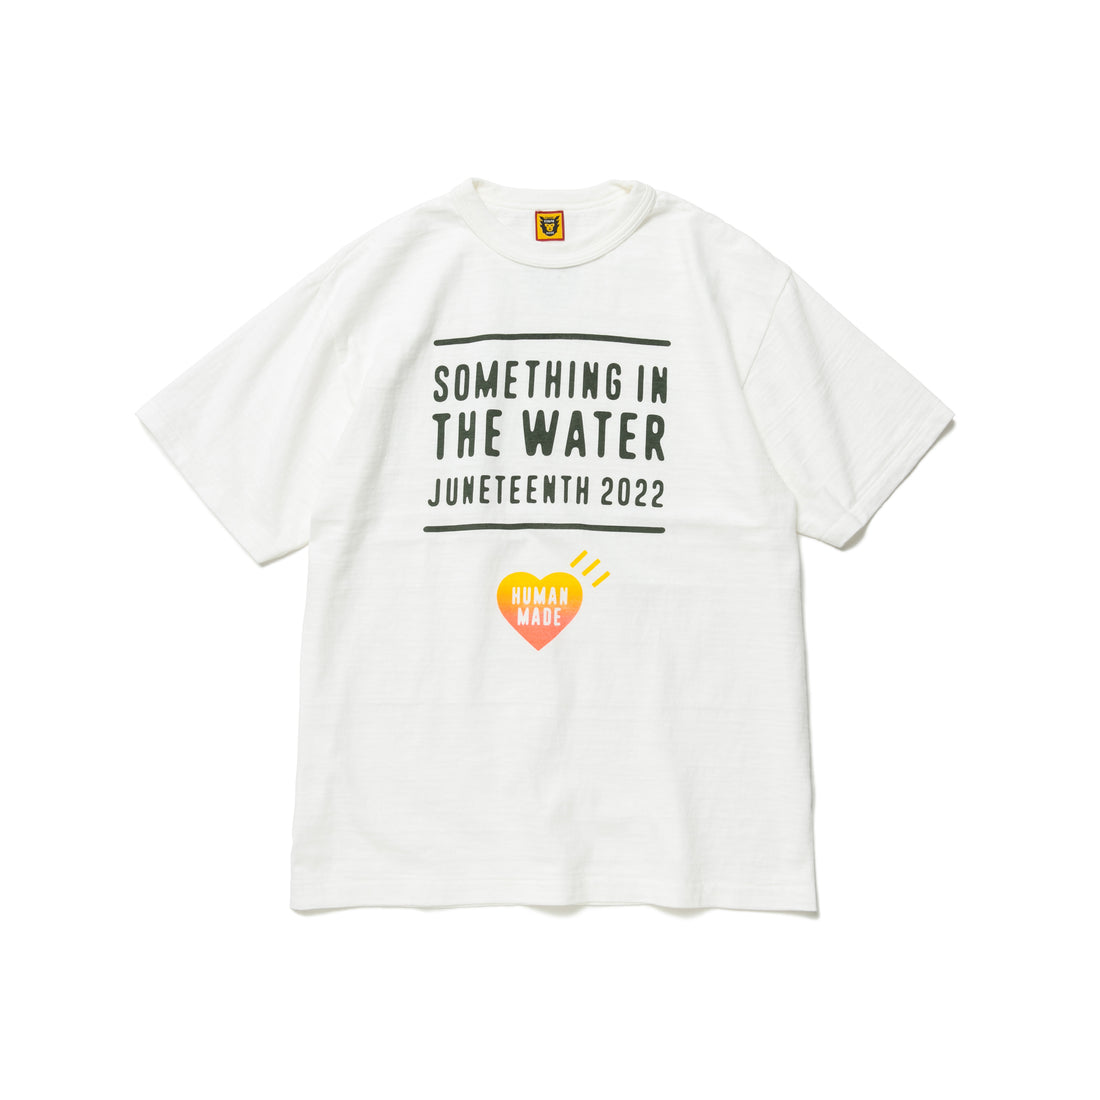 SOMETHING IN THE WATER T-SHIRT 発売のお知らせ